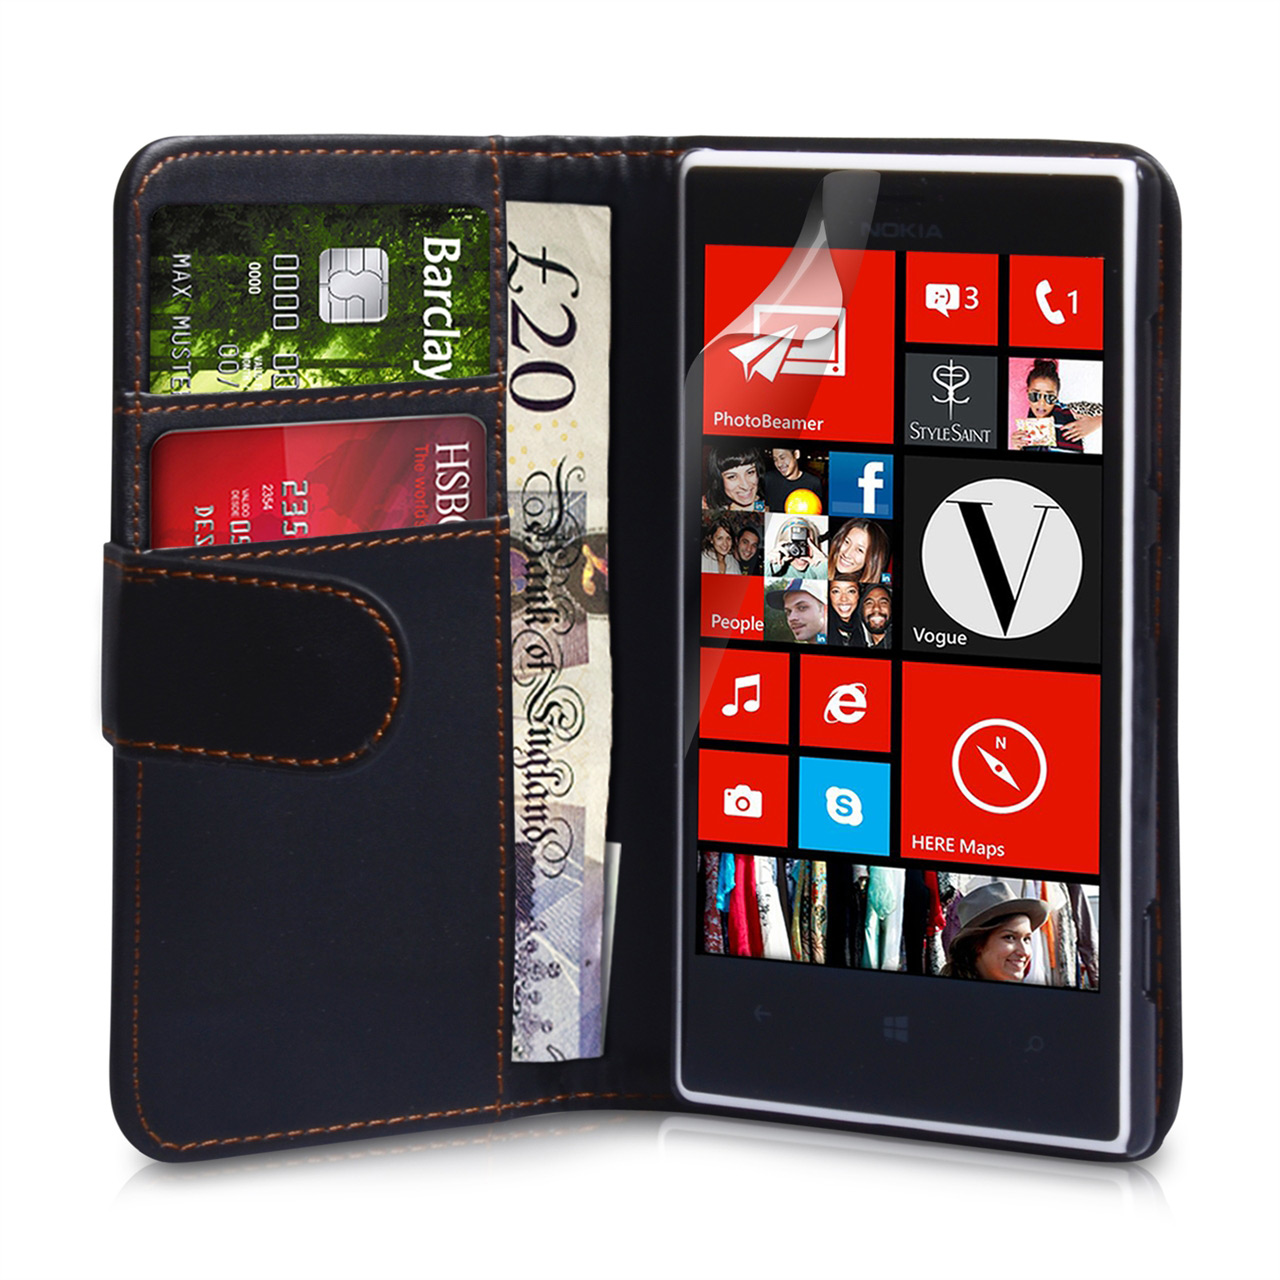 YouSave Accessories Nokia Lumia 720 Leather Effect Wallet Case - Black